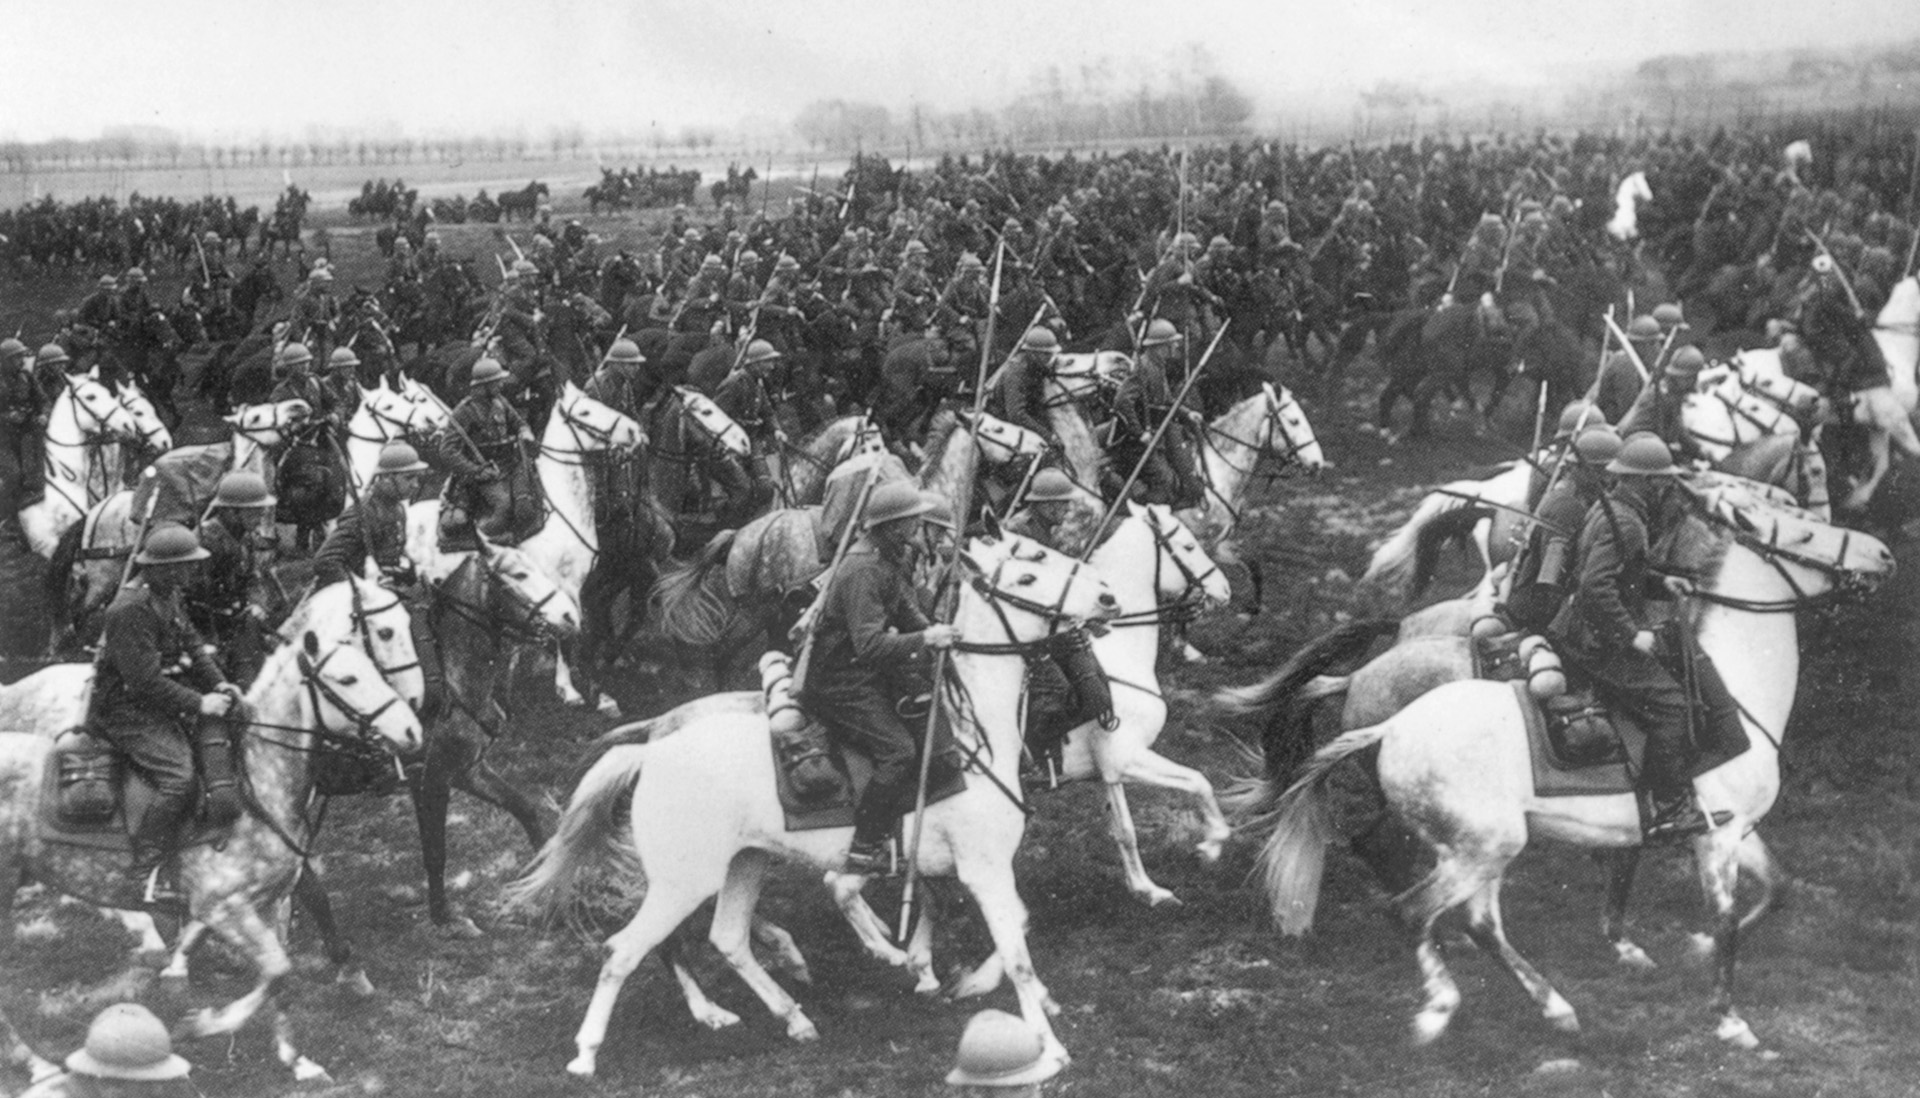 During prewar maneuvers, Polish lancers on horseback move into position. Contrary to popular myth, Polish cavalry did not directly charge German armor during the opening days of World War II.